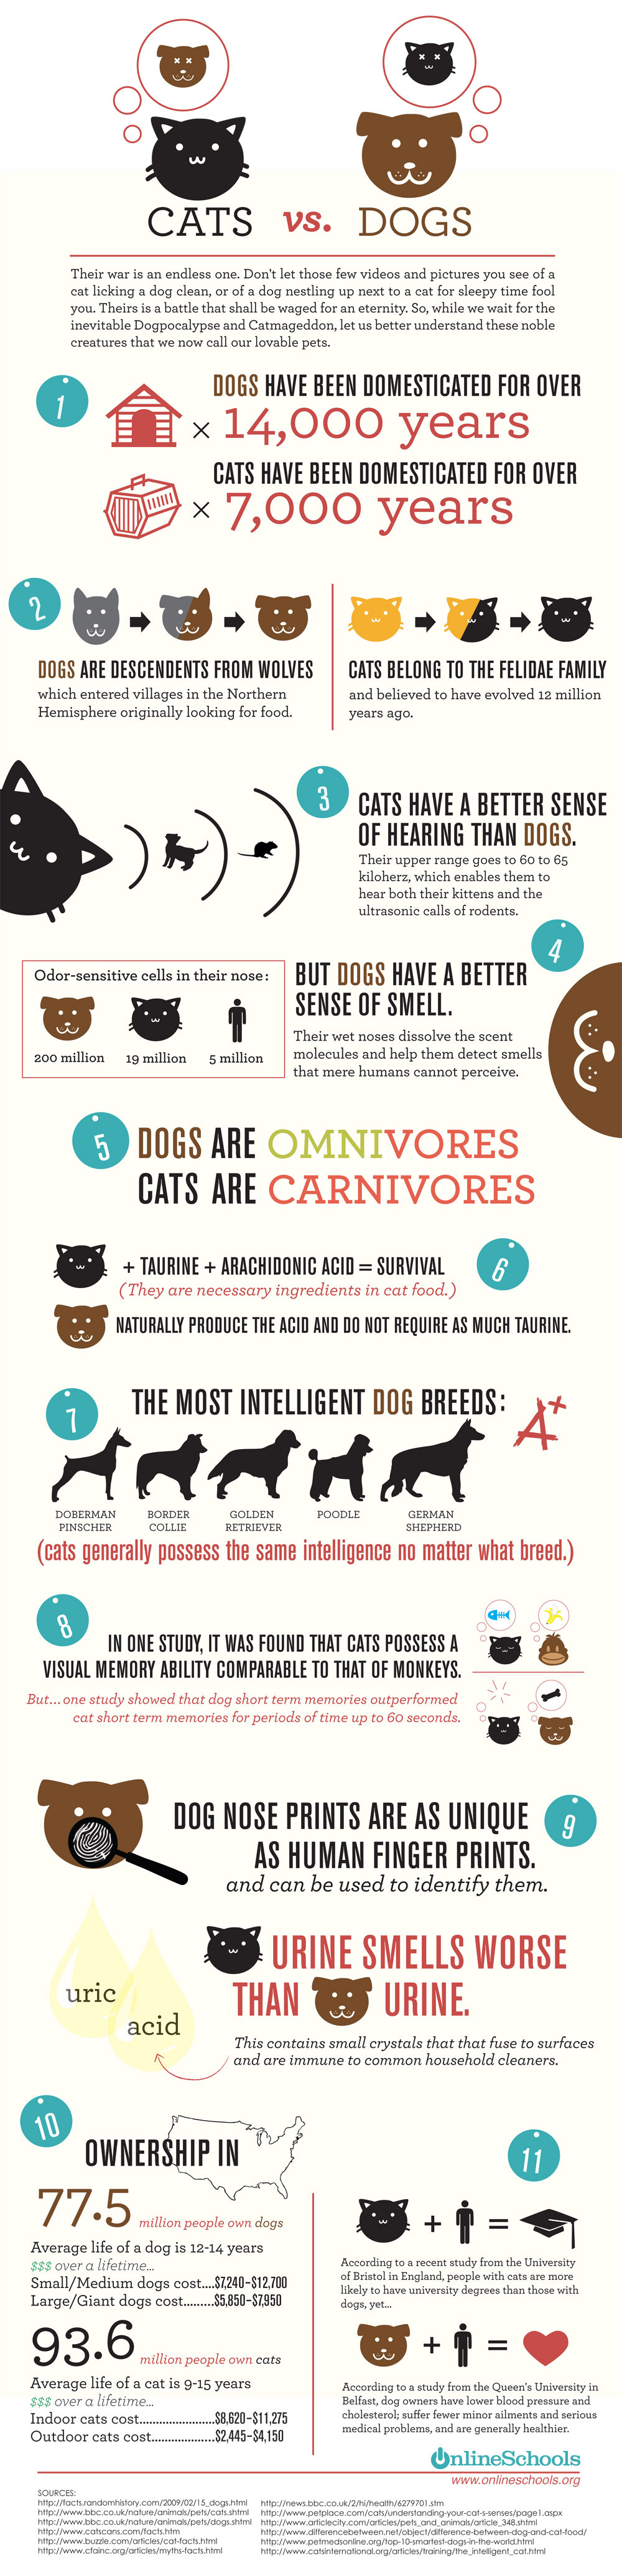 cats_vs_dogs